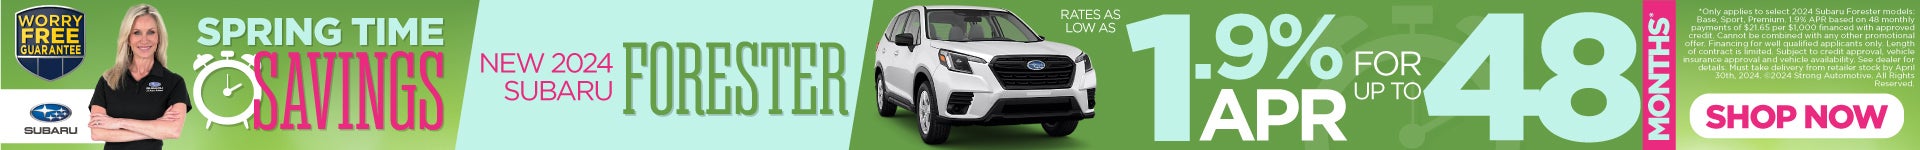 New 2024 Subaru Forester | Rates as low as 1.9% APR for up to 48 months*